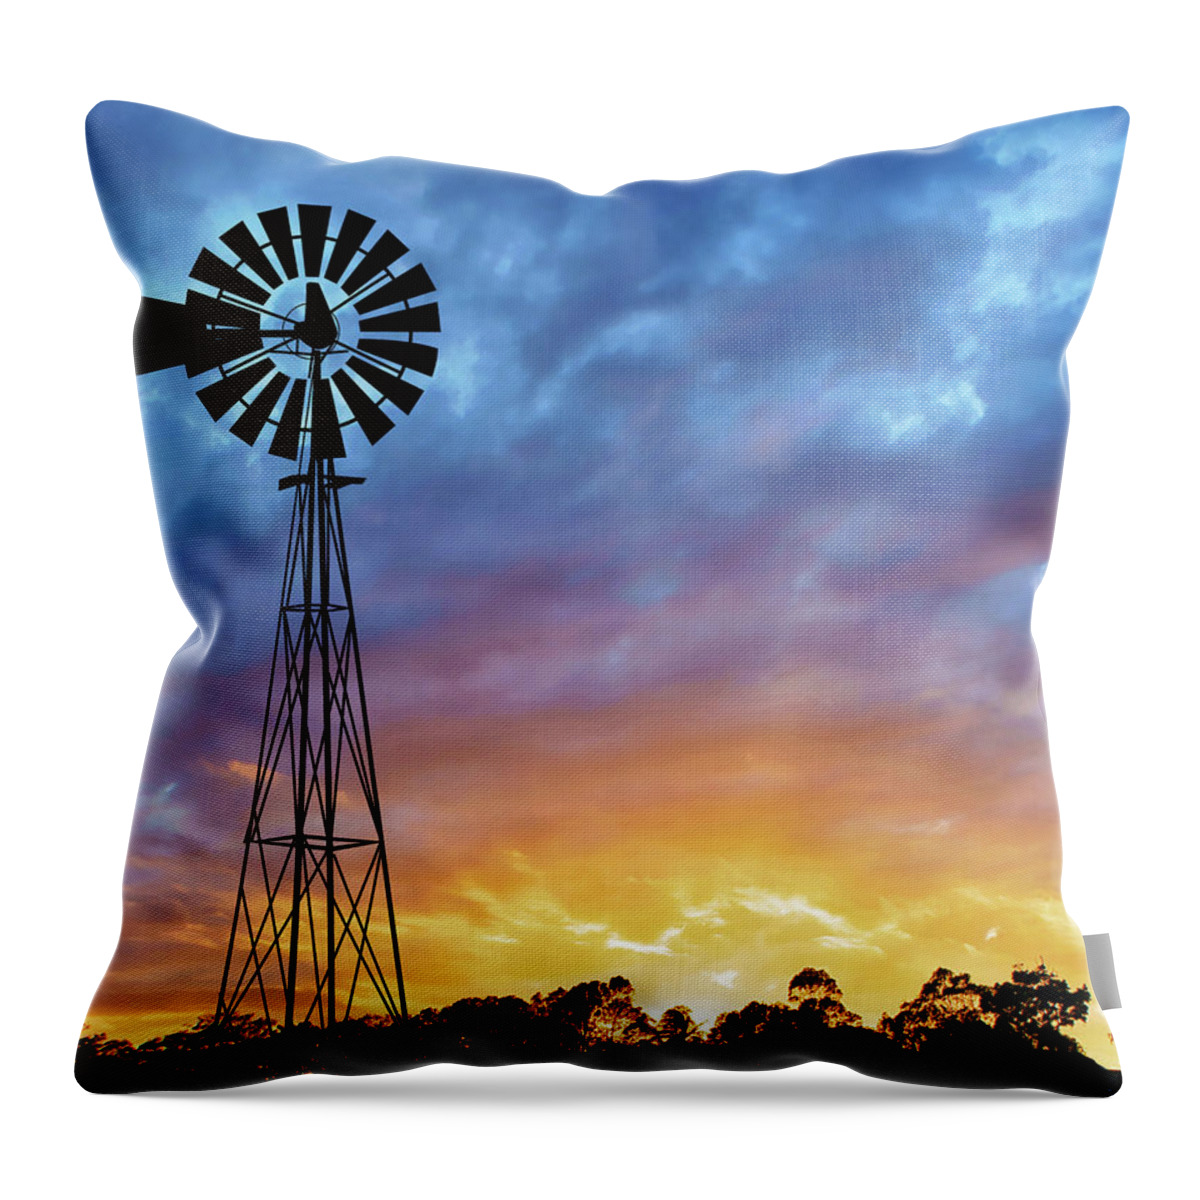 Windmill Throw Pillow featuring the digital art Windmill Sunrise 1 by Dave Lee